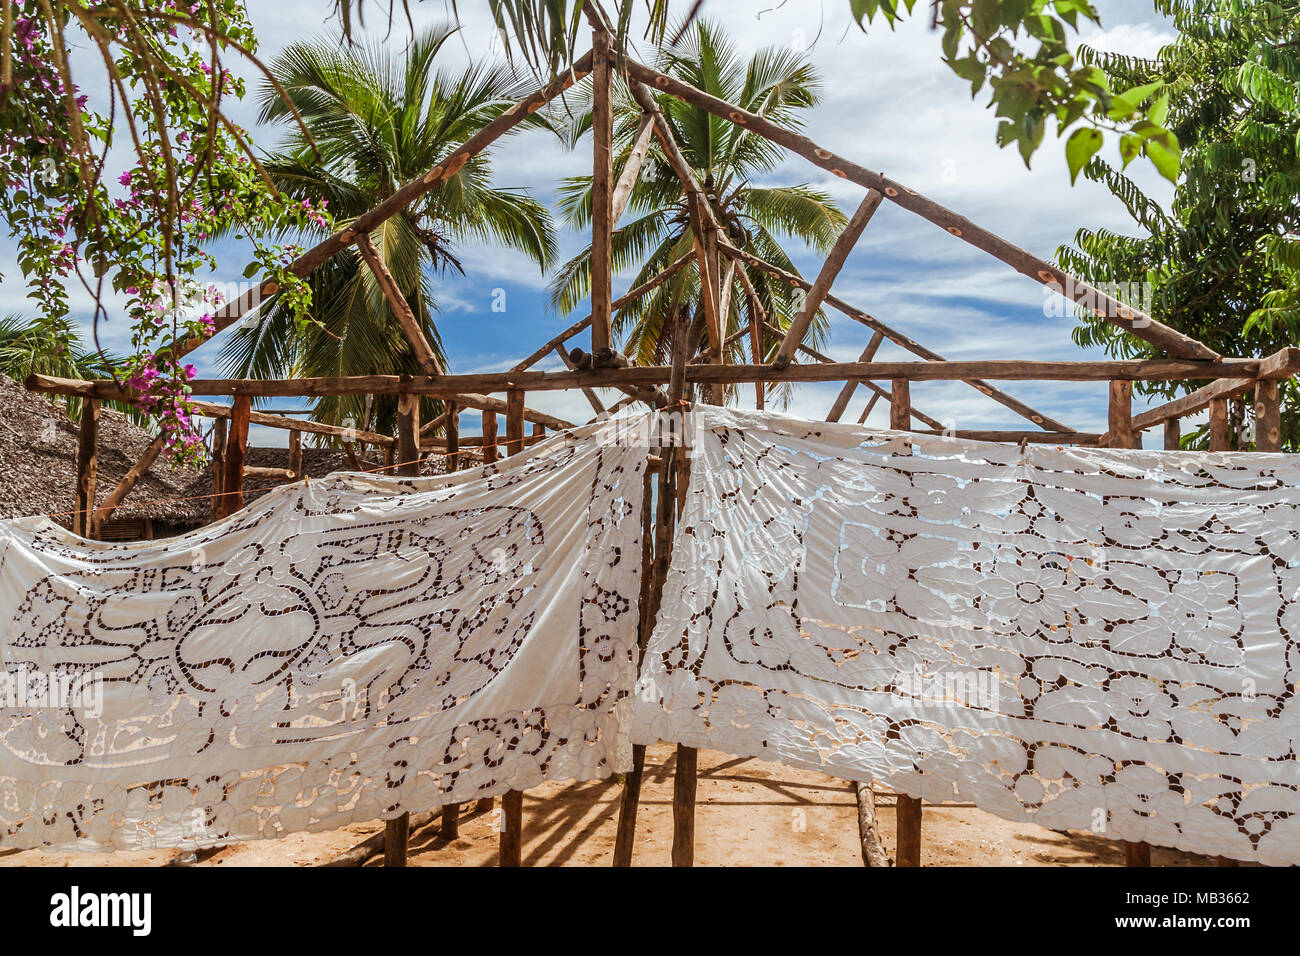 Selling embroidered tablecloths in Nosy Komba (Nosy Be), Madagascar Stock Photo